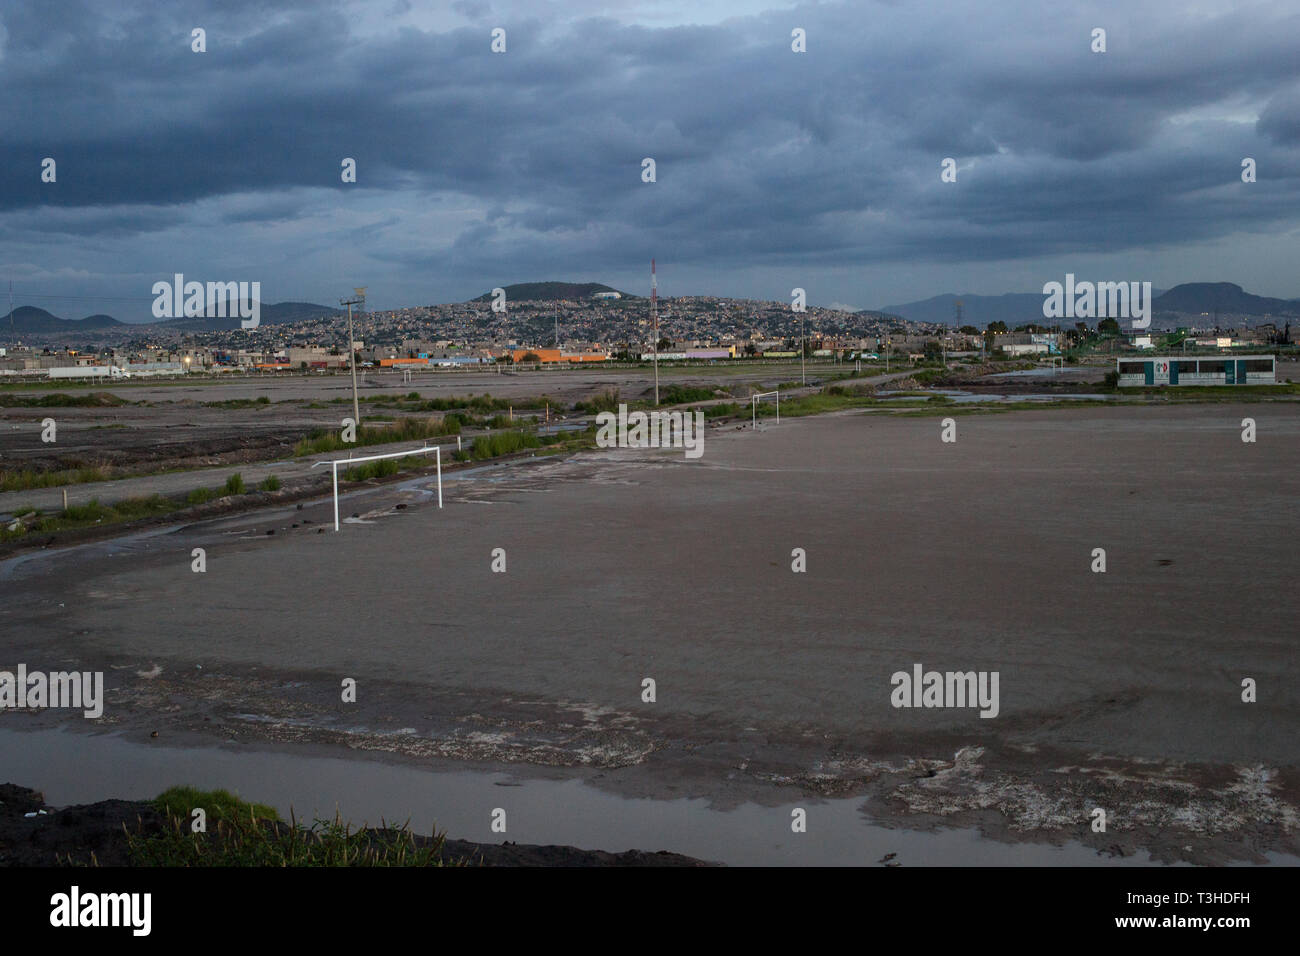 An area of land that was once part of Lake Texcoco, in Chimalhuac‡n, the State of Mexico, Mexico, August 24, 2017. A group of local residents are engaged in a land dispute over this land, which they call ÒTlatelesÓ, or Òmountain of sandÓ which the Mexican Federal Government wanted to use for the new Mexico City Airport International project. Mexico's newly elected president Andreas Lopez Manuel Obrador canceled this project in the fall of 2018, while it was in the middle of construction. The airport was set to replace the aging Benito Juarez International Airport. Stock Photo